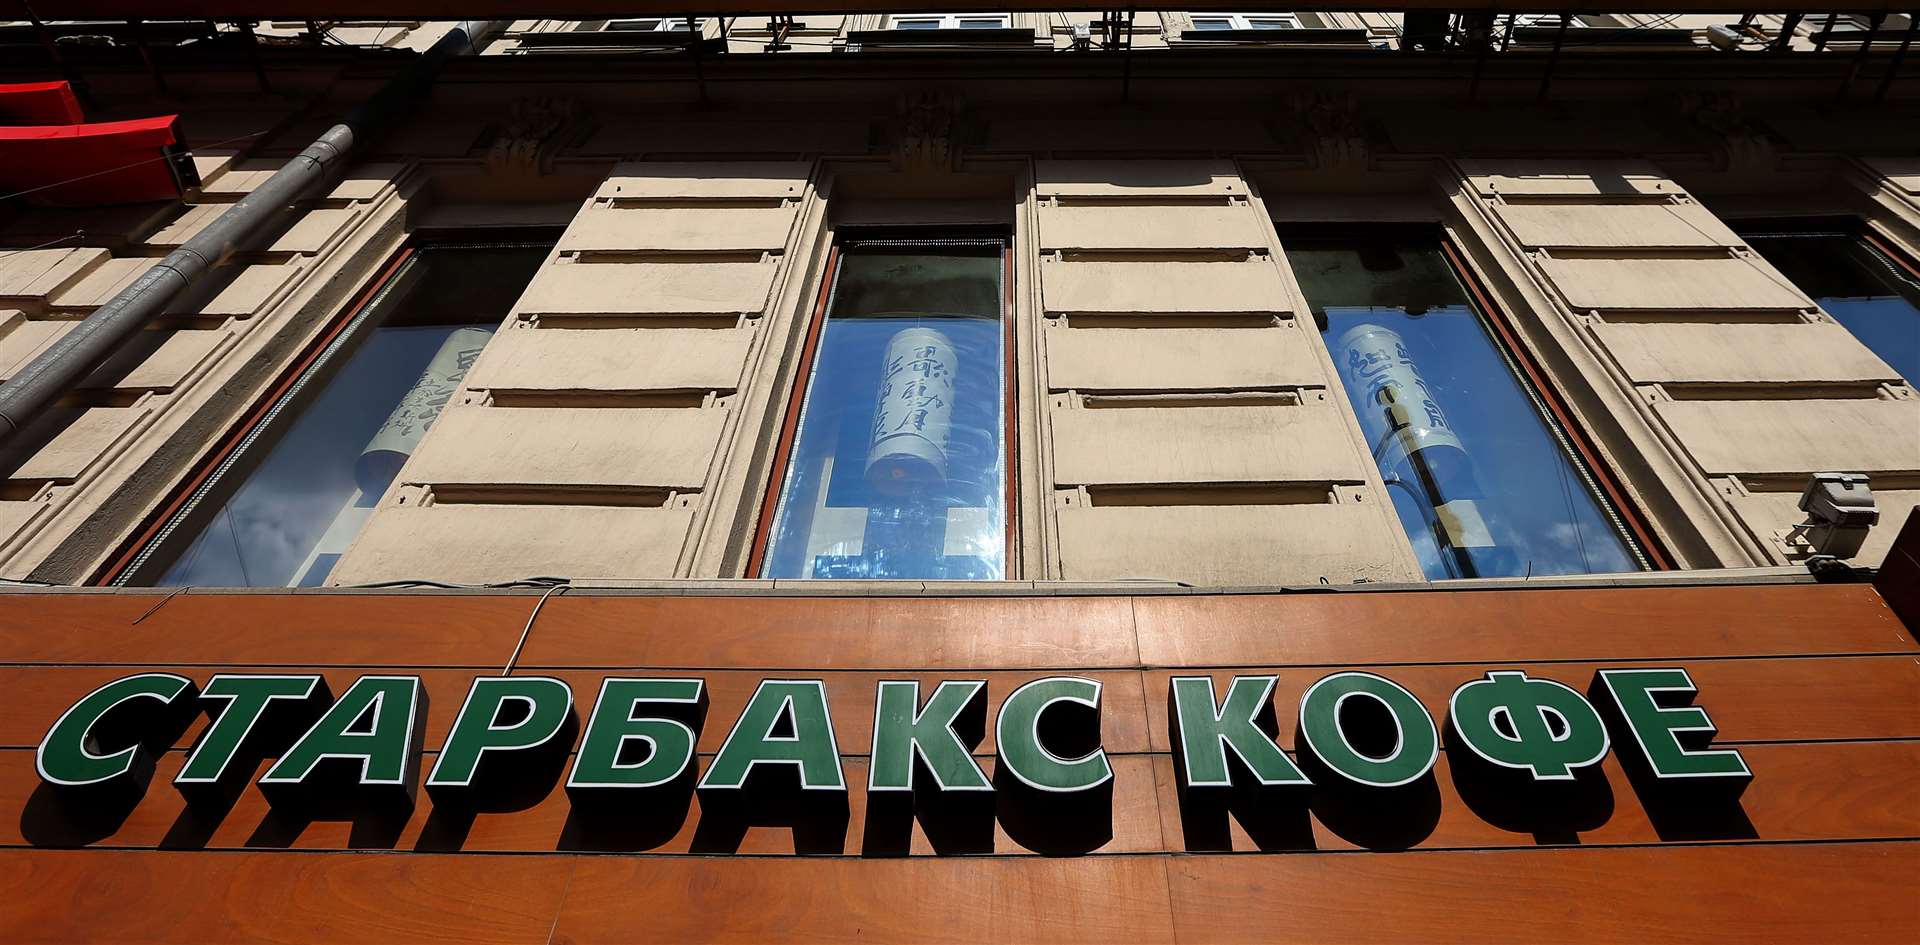 A Starbucks Coffee shop sign in Moscow, Russia before the war (Dave Thompson/PA)